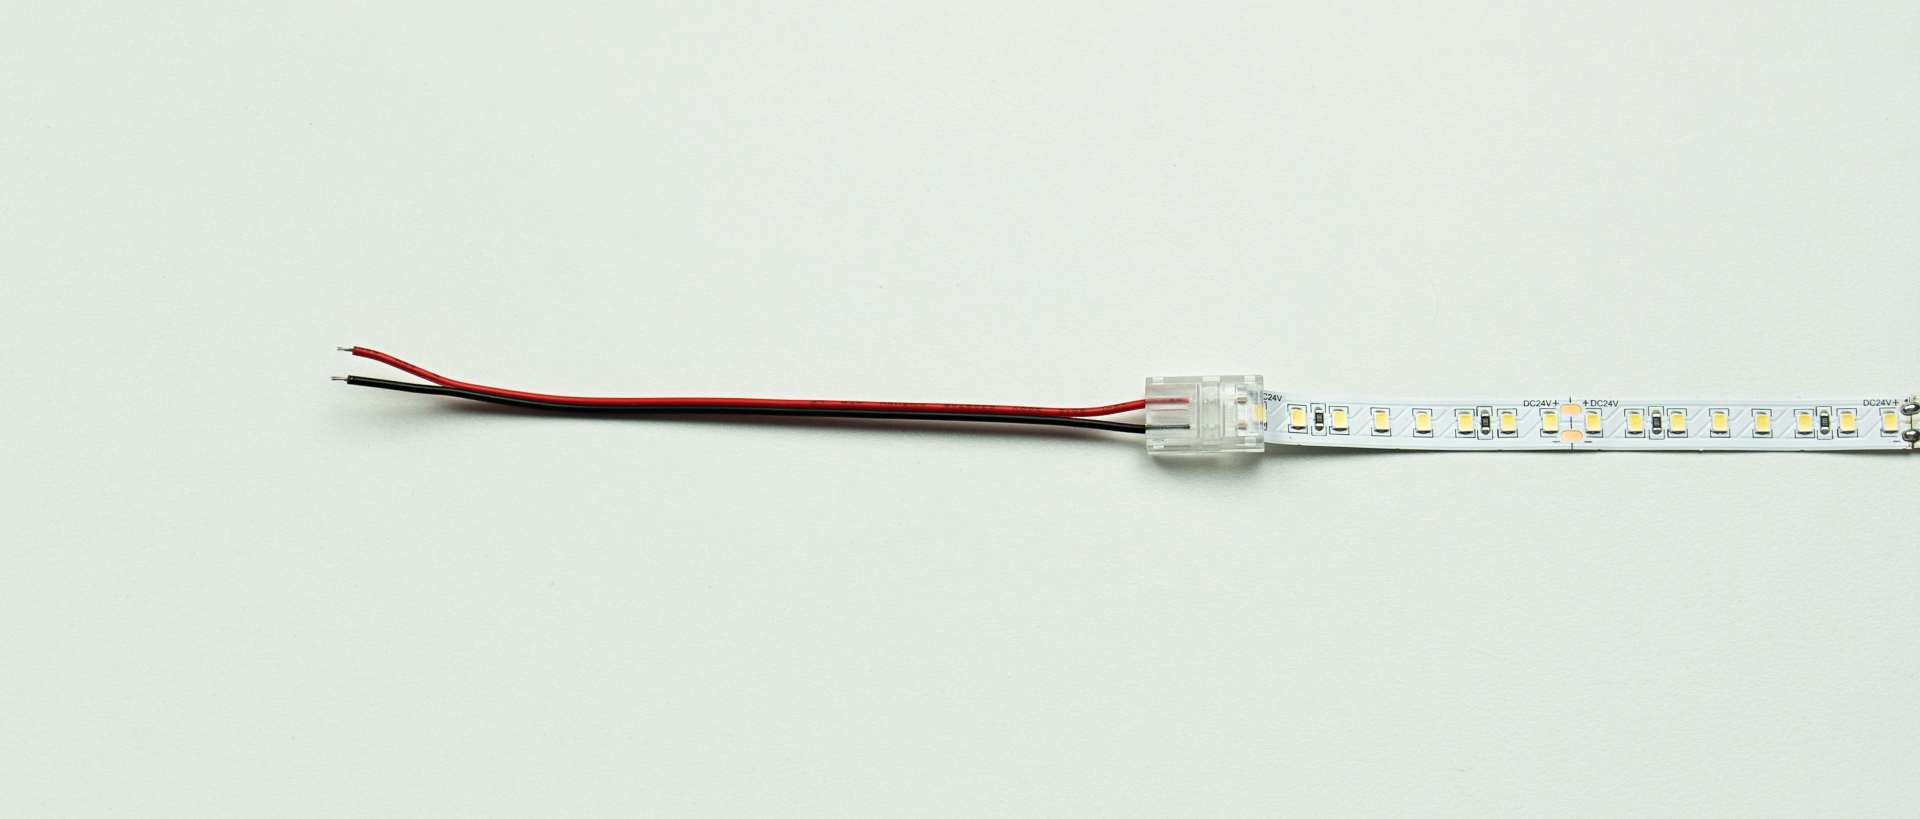 Connection diagram of the LED strip and cable using a single-sided connector